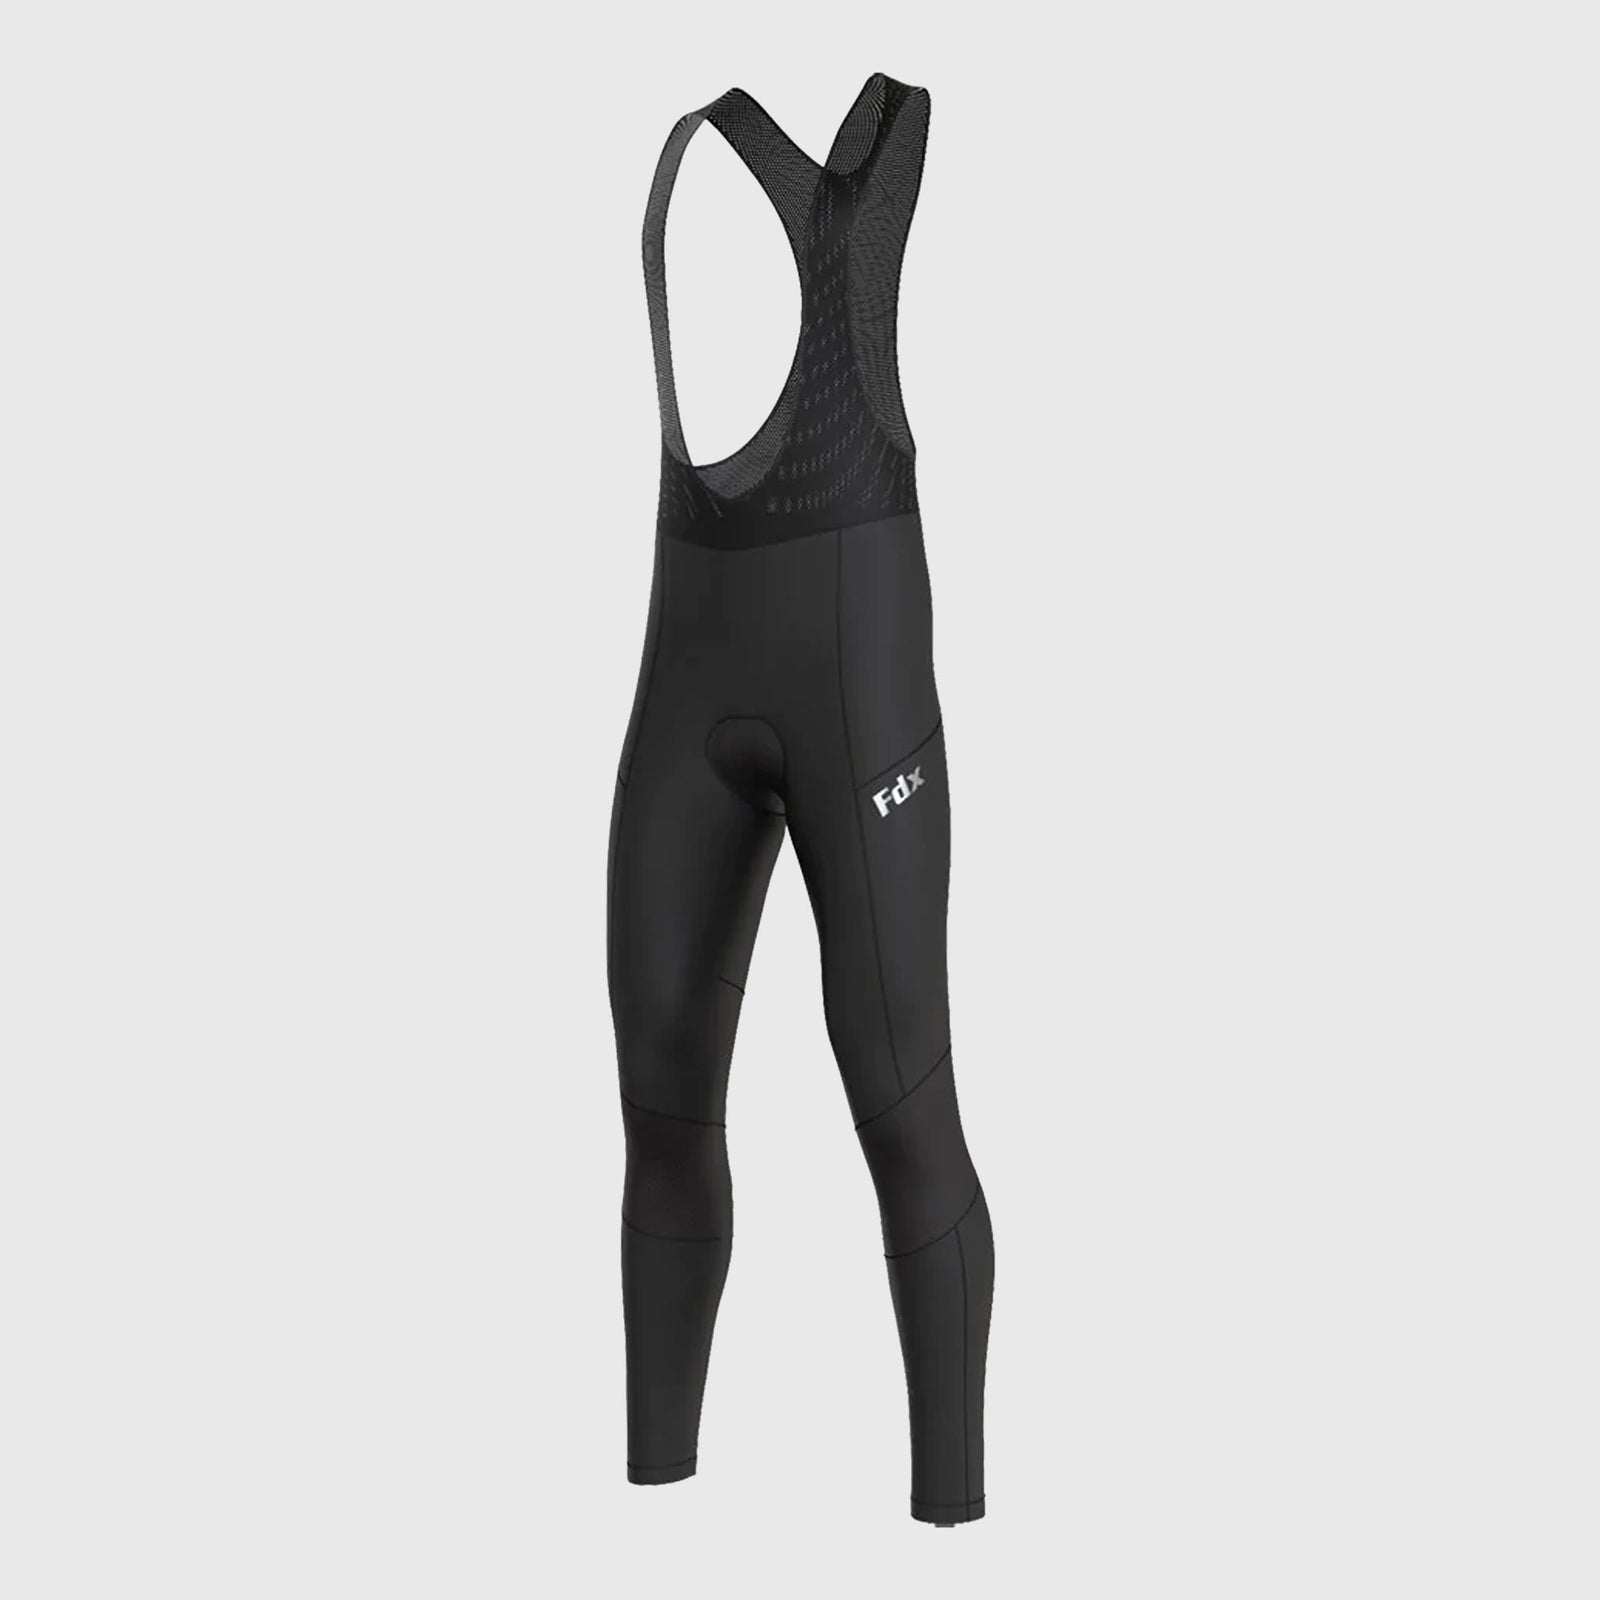 Peppermint Cycling Co. Navy Thermal Bib Tights - Bow Cycle